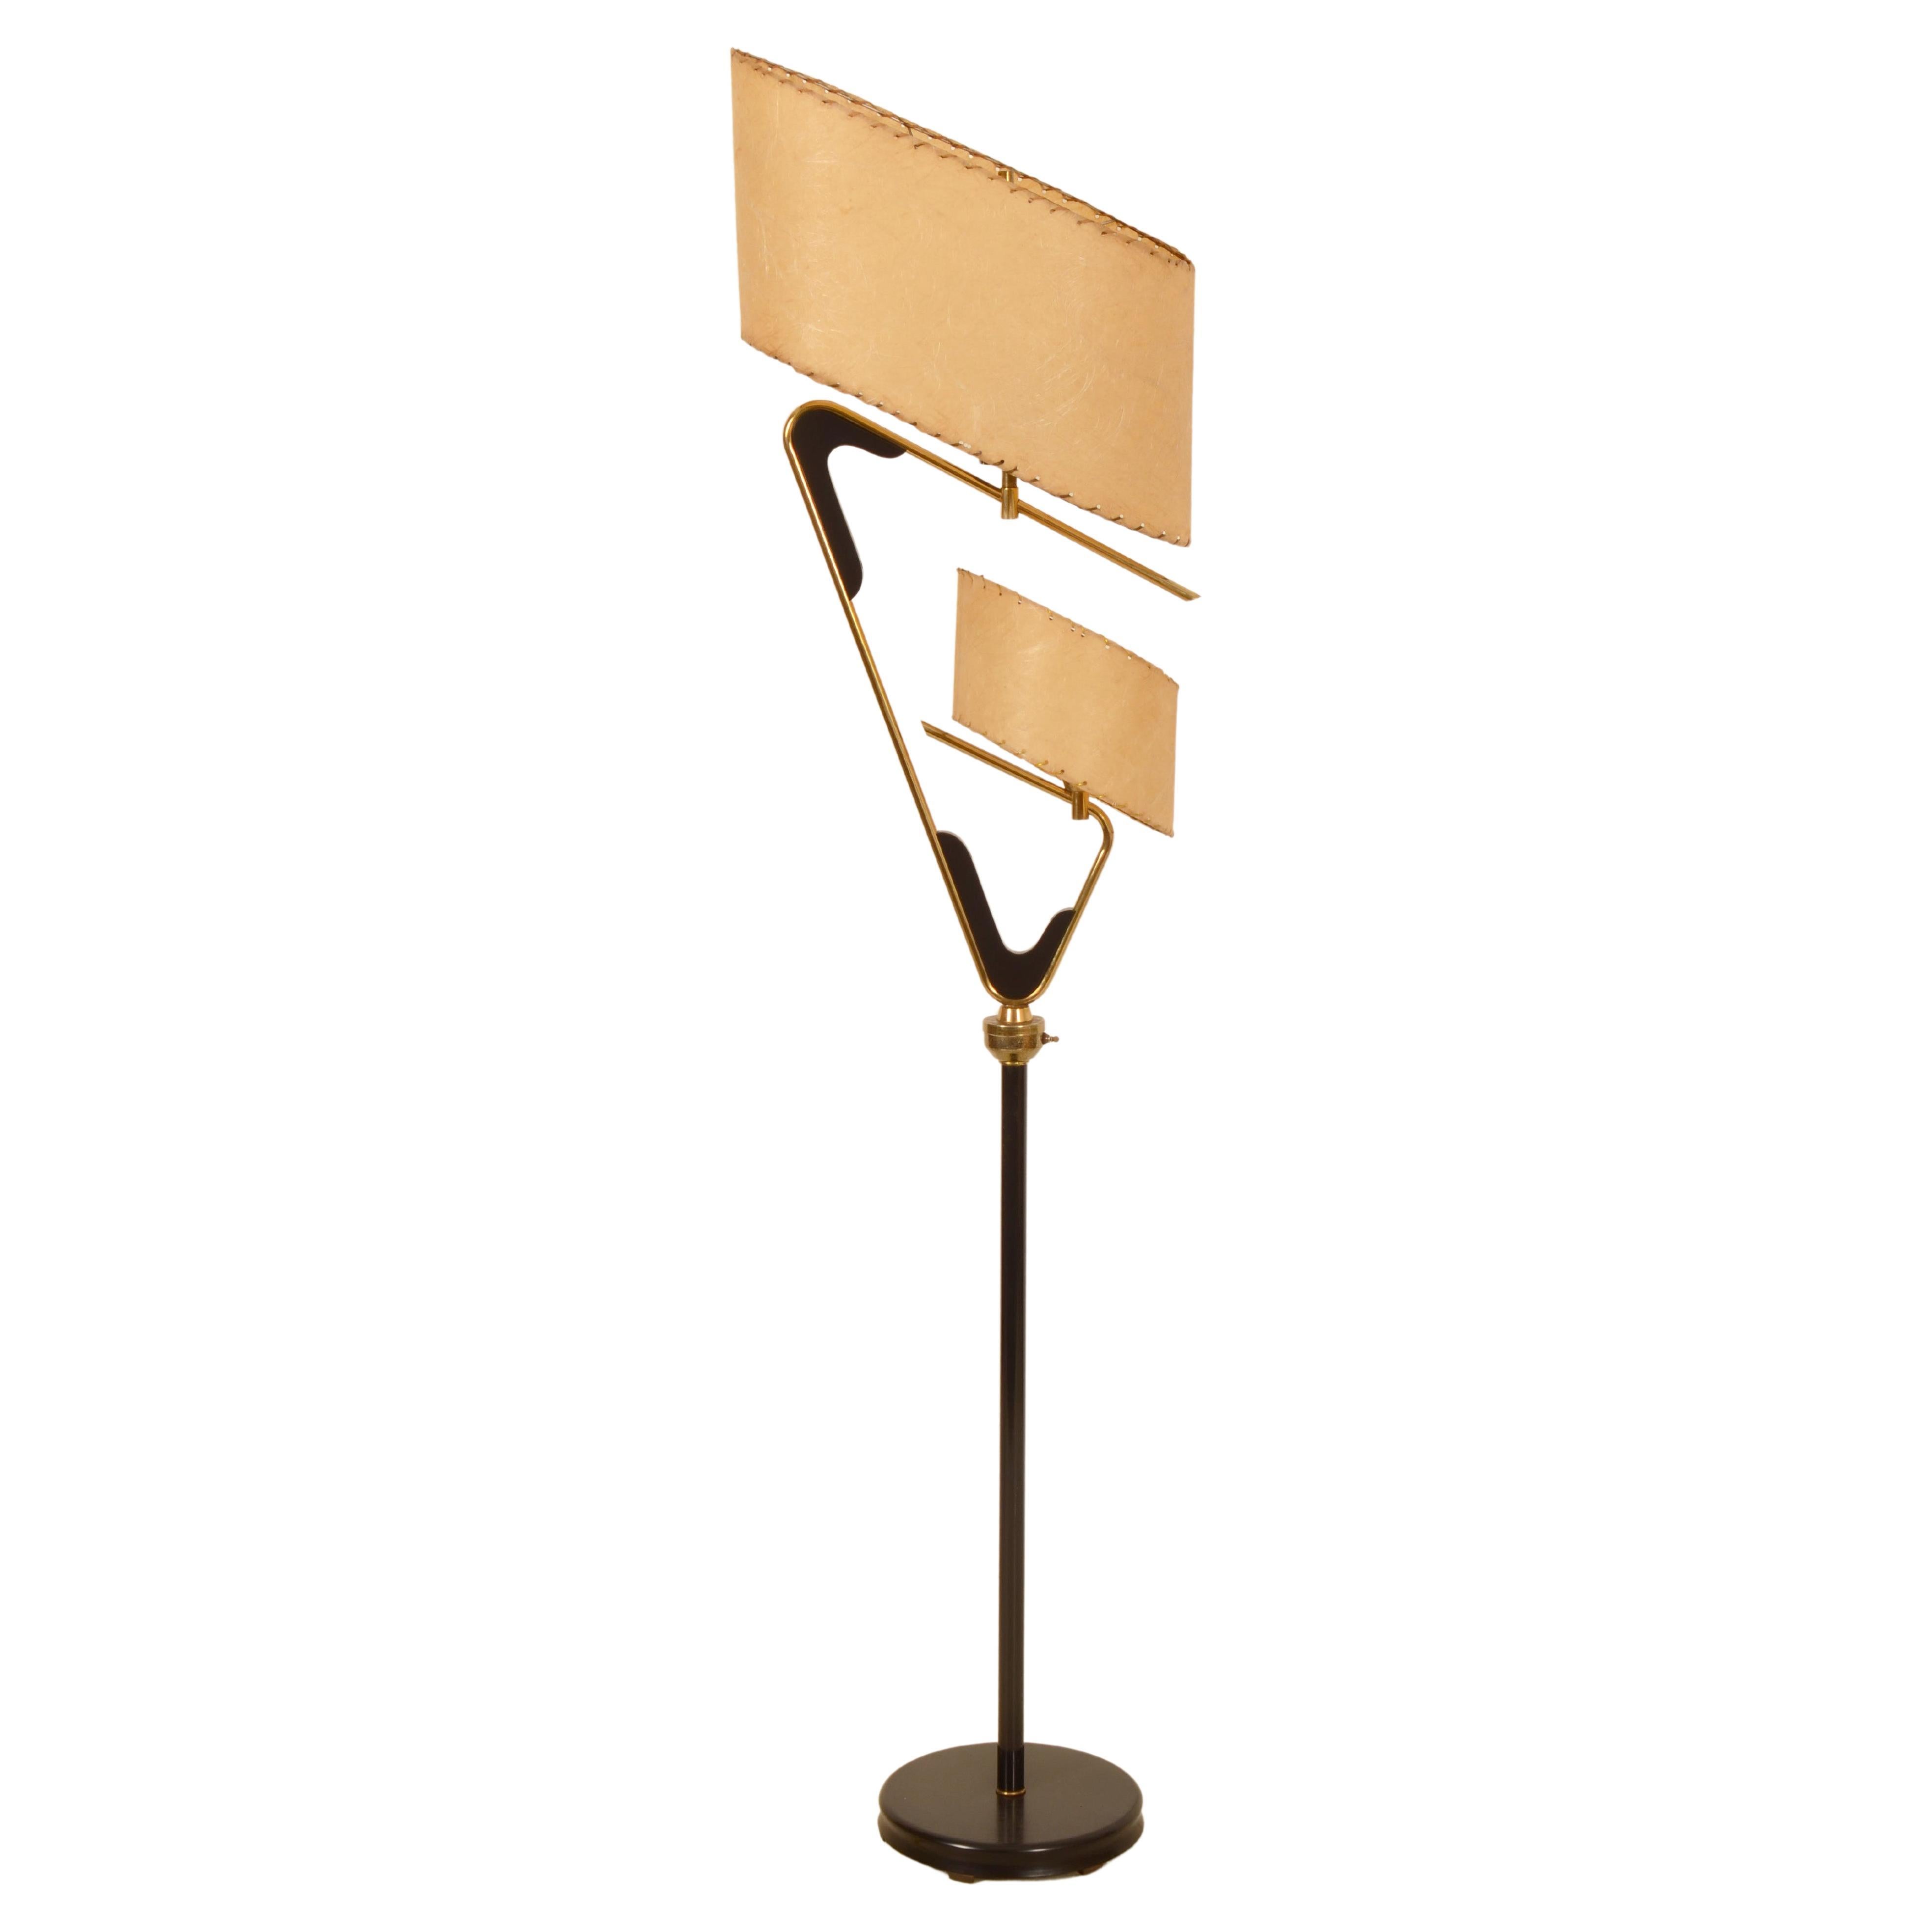 Italian Midcentury Floor Lamp with Parchment Shades For Sale